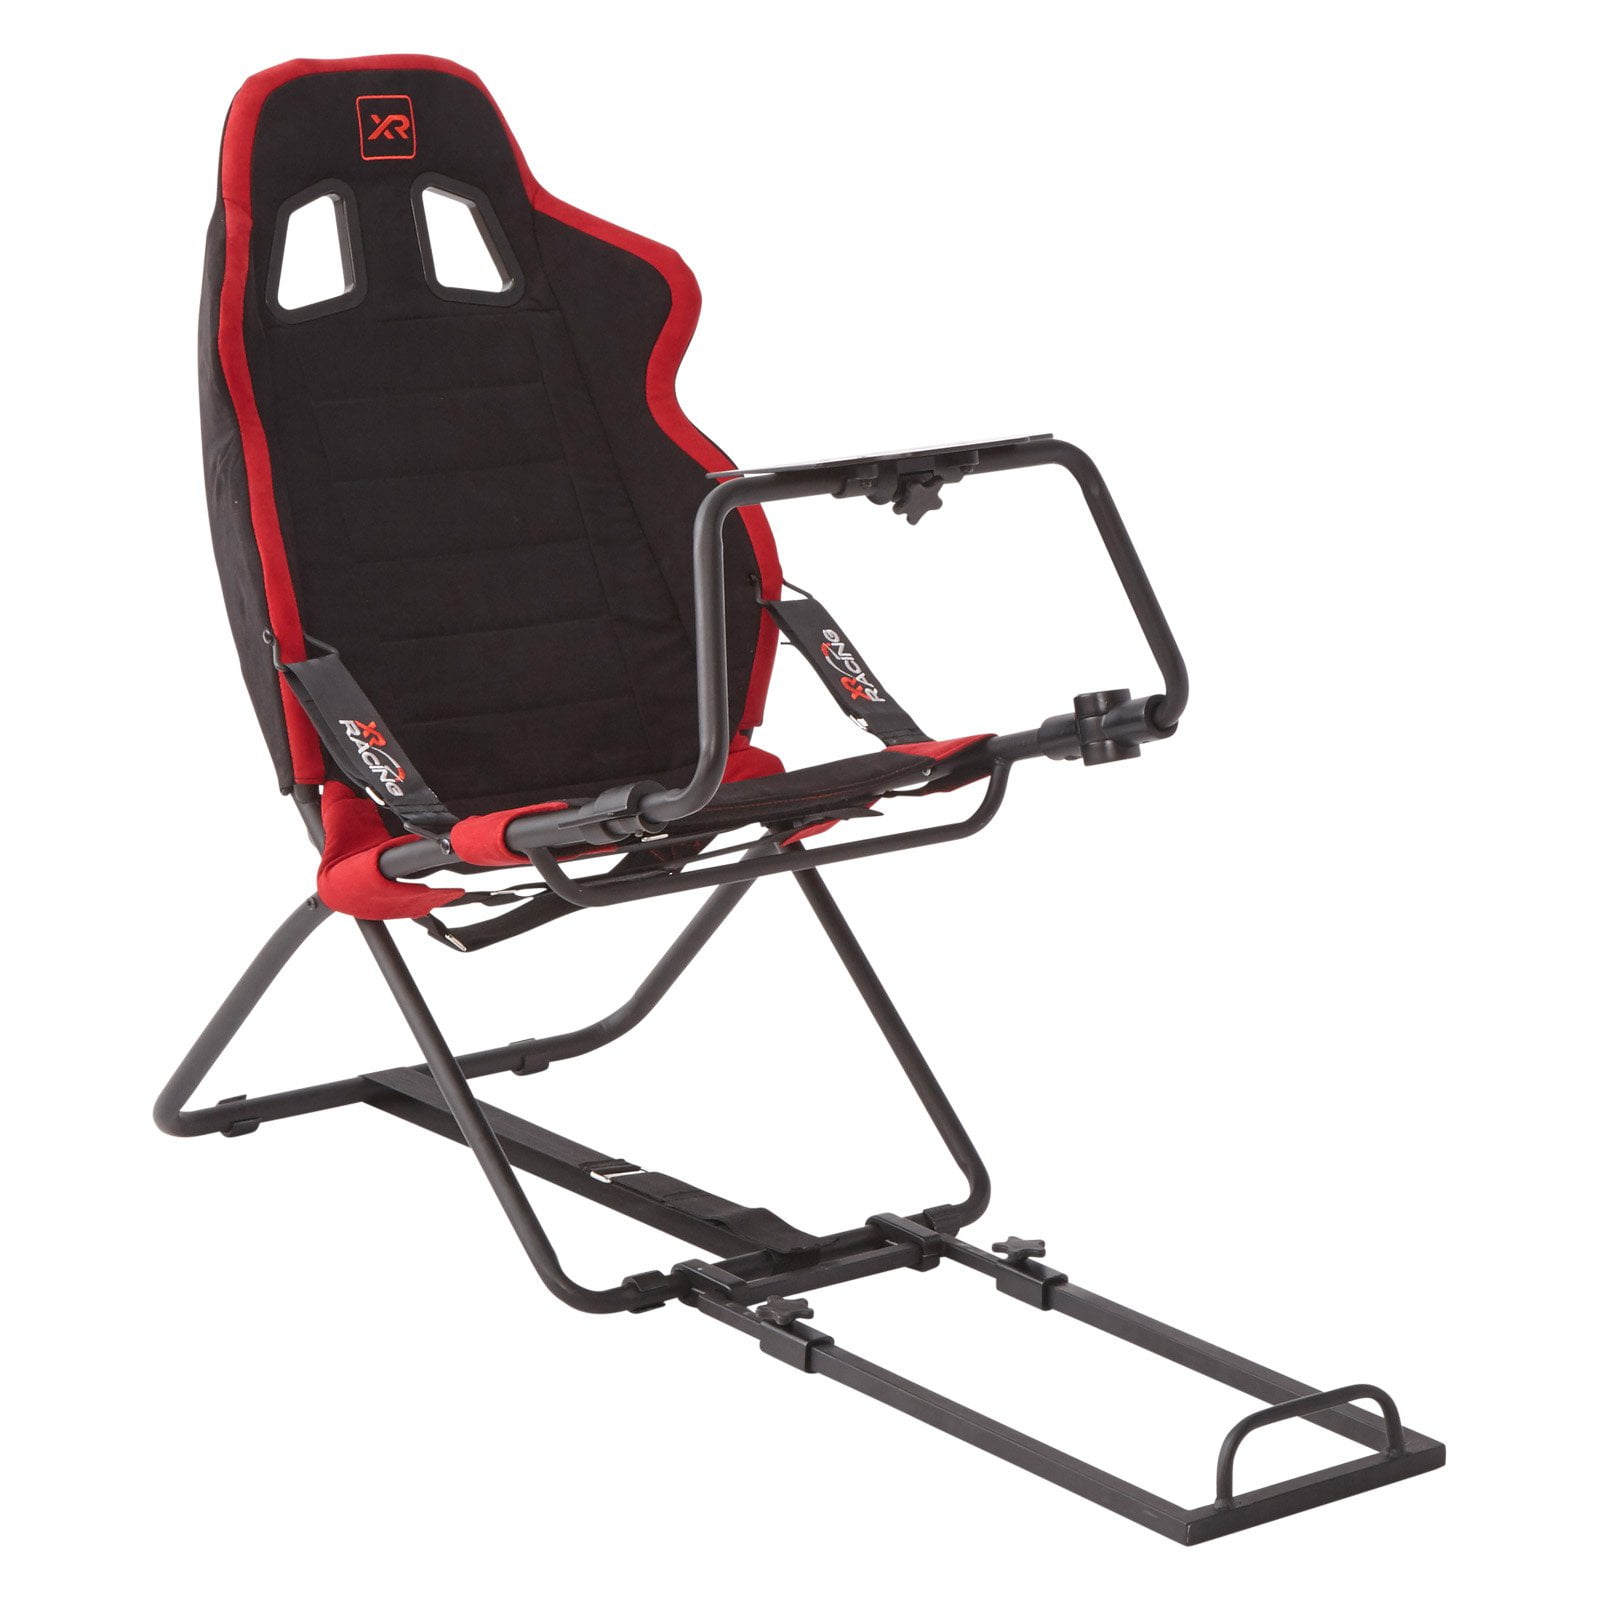 baby gaming chair